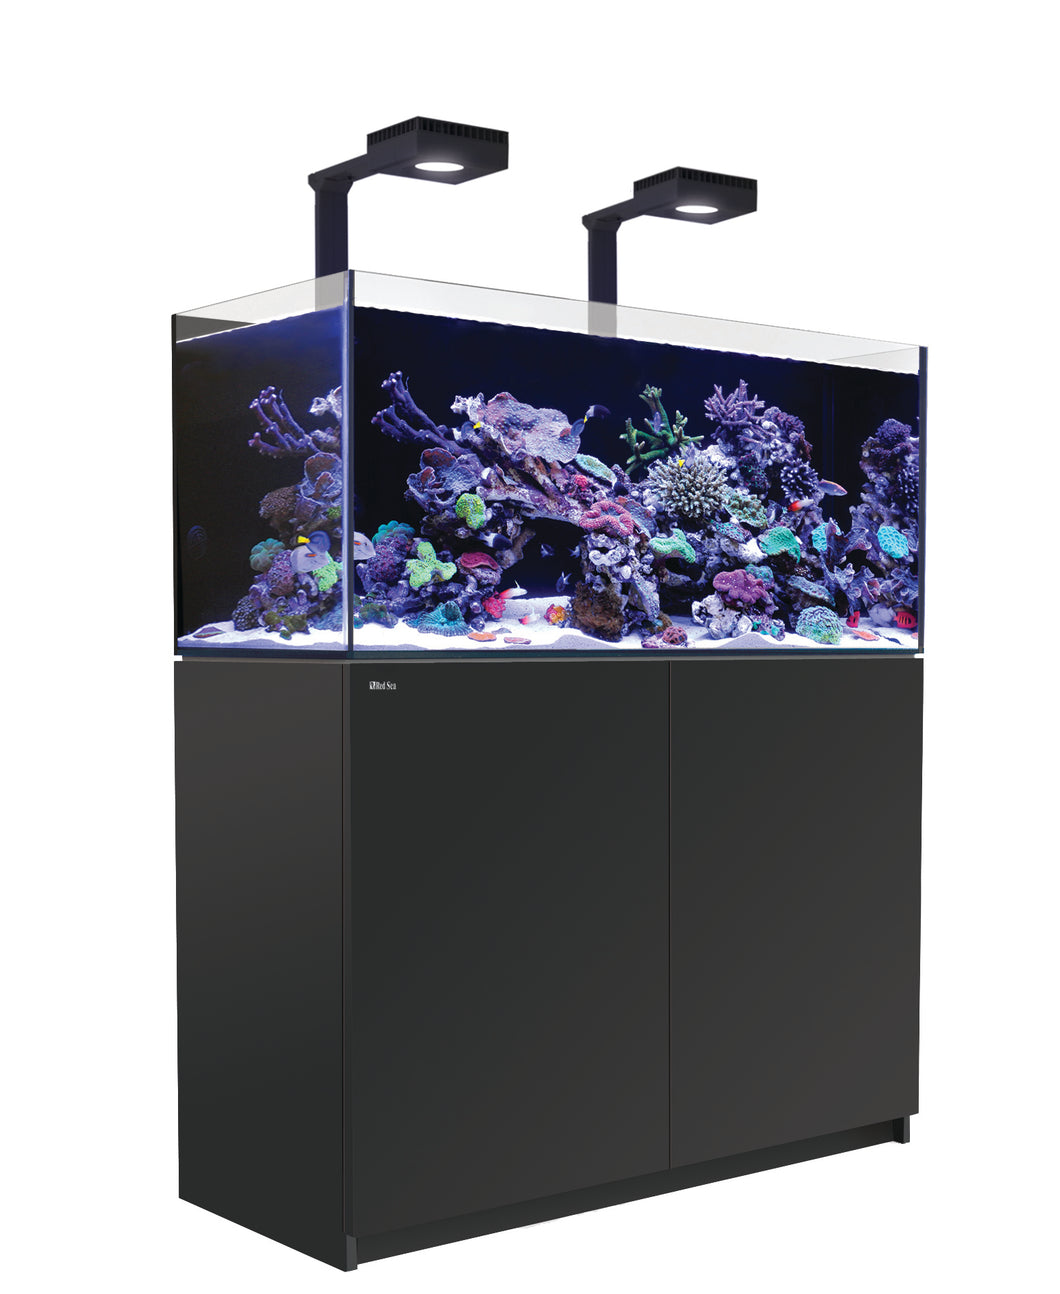 Red Sea REEFER-350 G2 Deluxe Premium Reef Aquarium 90 Gallons Reef-Ready LED Systems